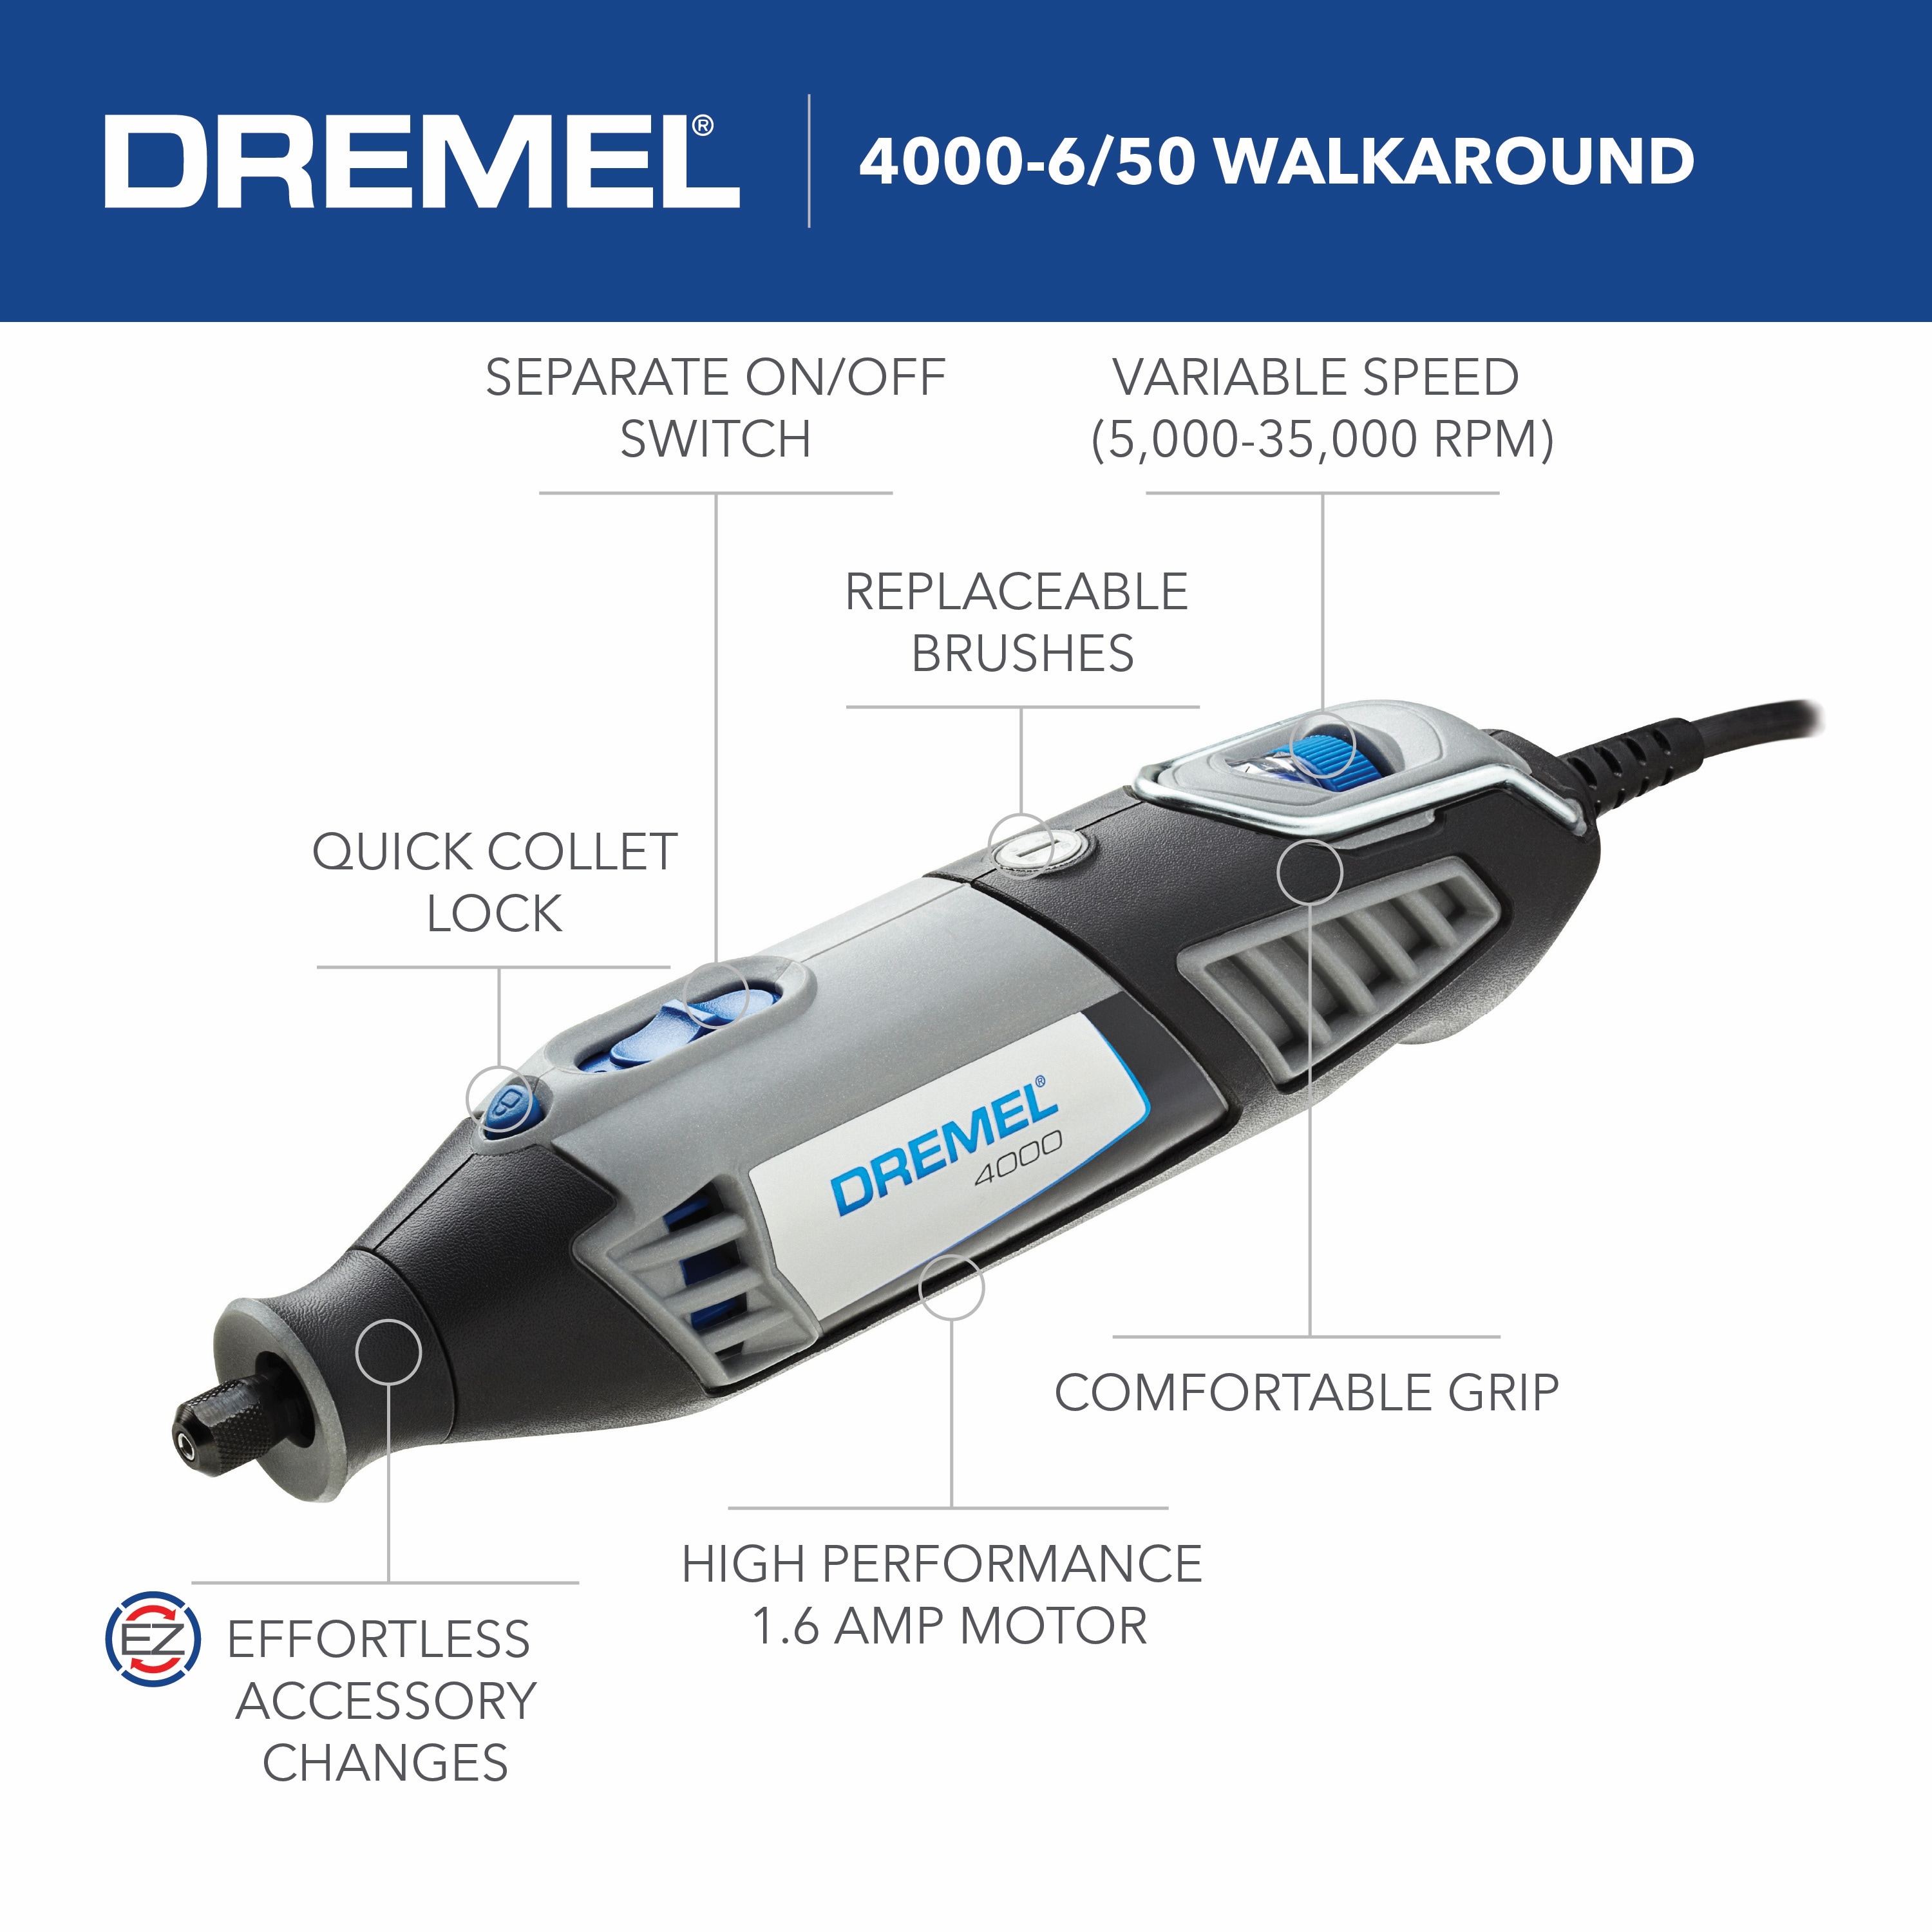 Dremel 3000 Variable Speed Rotary Tool & Accessories, Instructions in Hard  Case